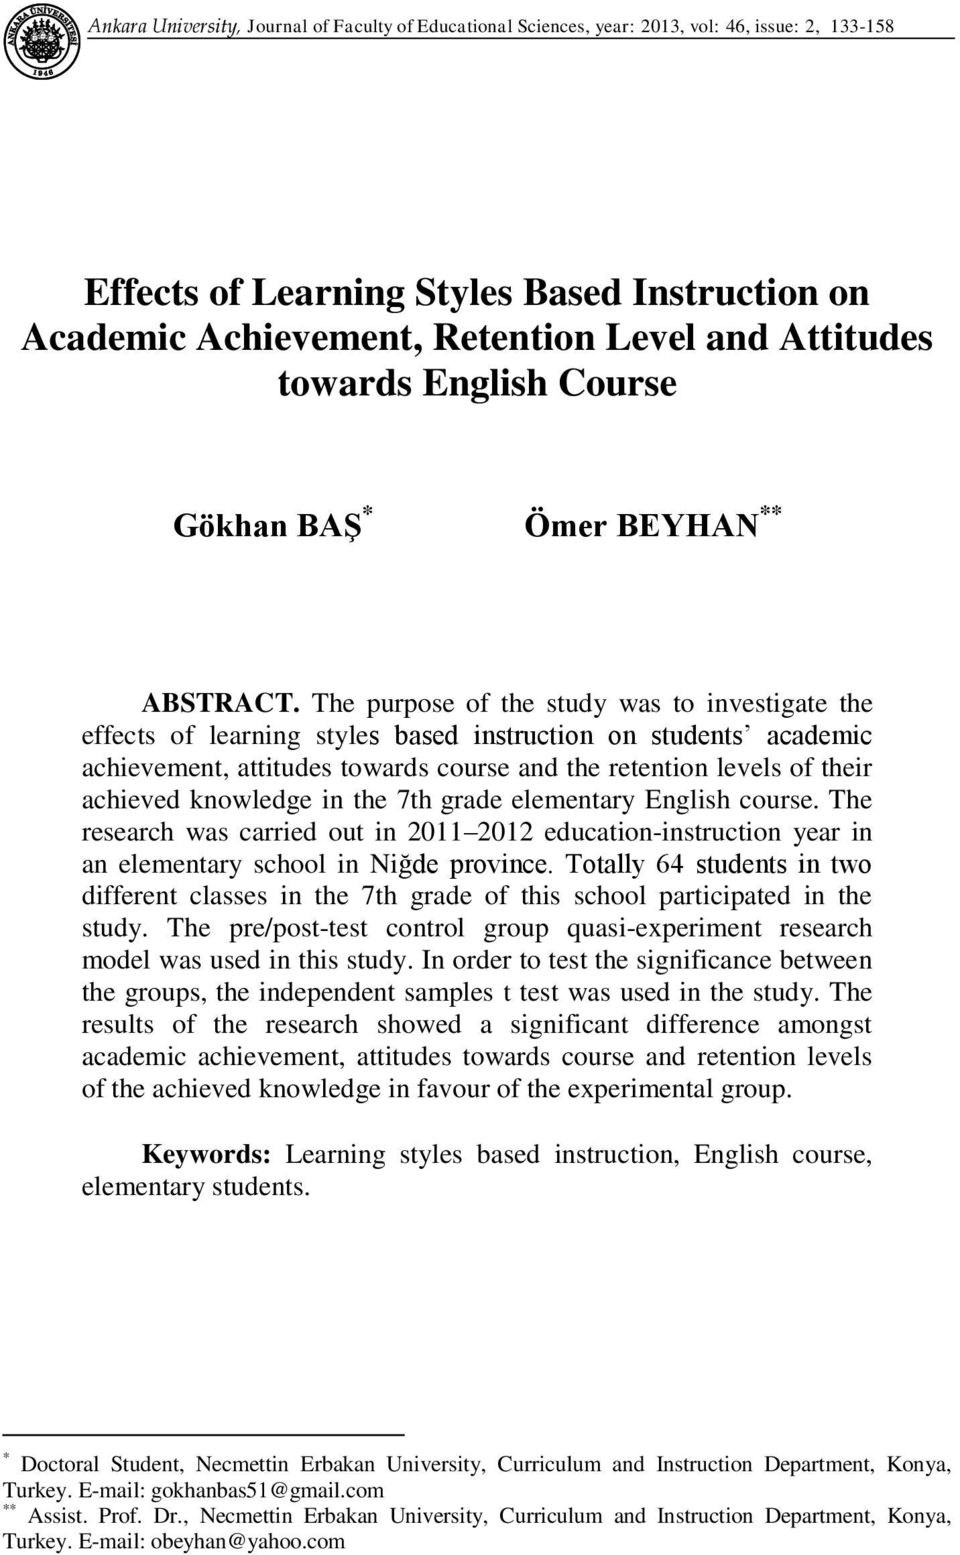 The purpose of the study was to investigate the effects of learning styles based instruction on students academic achievement, attitudes towards course and the retention levels of their achieved